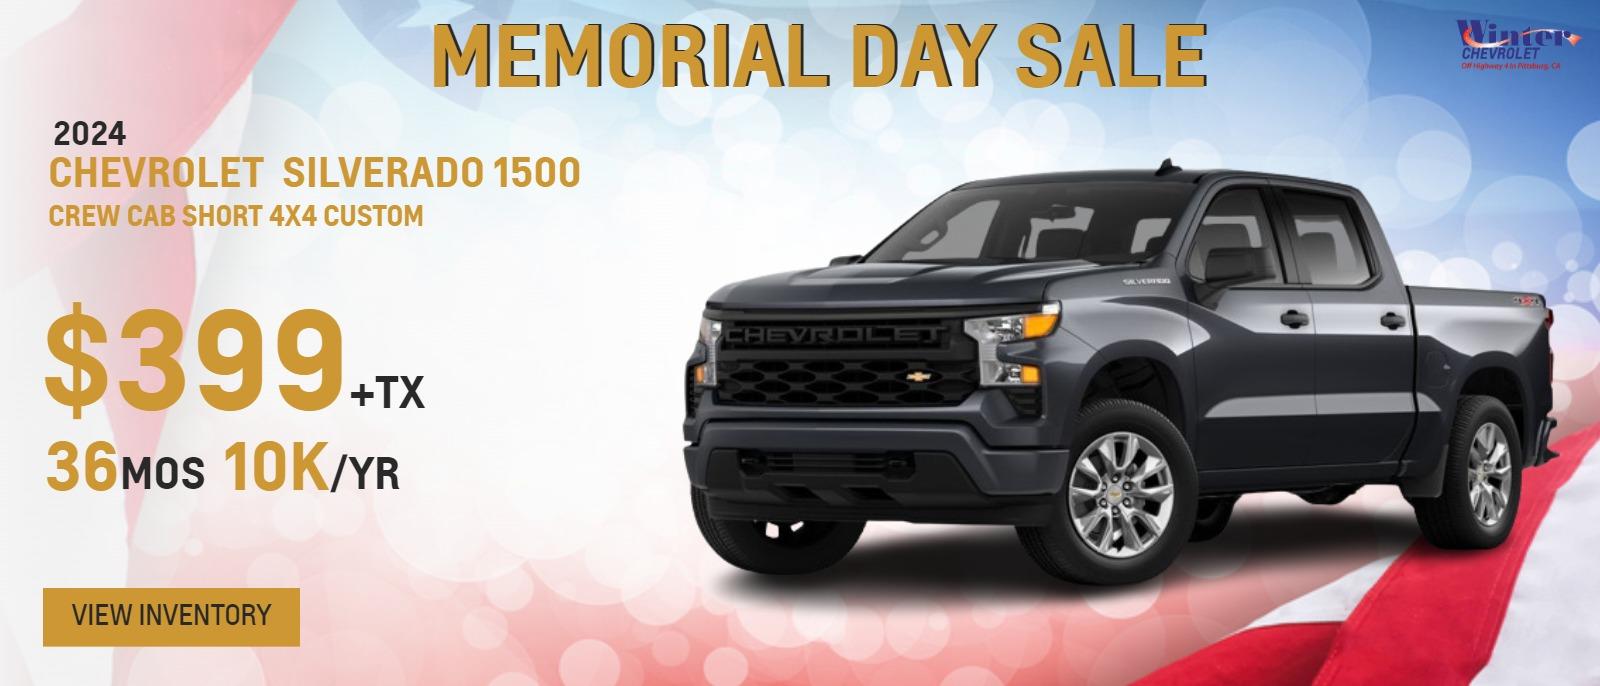 2024 Silverado Crew Cab Short 4x4 Custom
MSRP $52,850
$4,999 cash from customer
$399+tx
36mos
10k/yr

Disclosure: Lease based on New 2024 Chevy Silverado Crew Cab 4x4 Custom (RZ177636, RZ194609). MSRP of $52,850 - $8,499 due at lease signing including $4999 from customer, $2500 Chevy Loyalty Rebate, $1000 Chevy Incremental CCR Rebate, $399 first monthly payment, plus taxes, titles, license and documentary service fees. No security deposit required. Option to purchase at lease end $35,409.50. Lessee is responsible for $.25 per mile over 10,000 miles/year, excess wear, and a $395 termination fee. Offer Expires 06/03/2024.